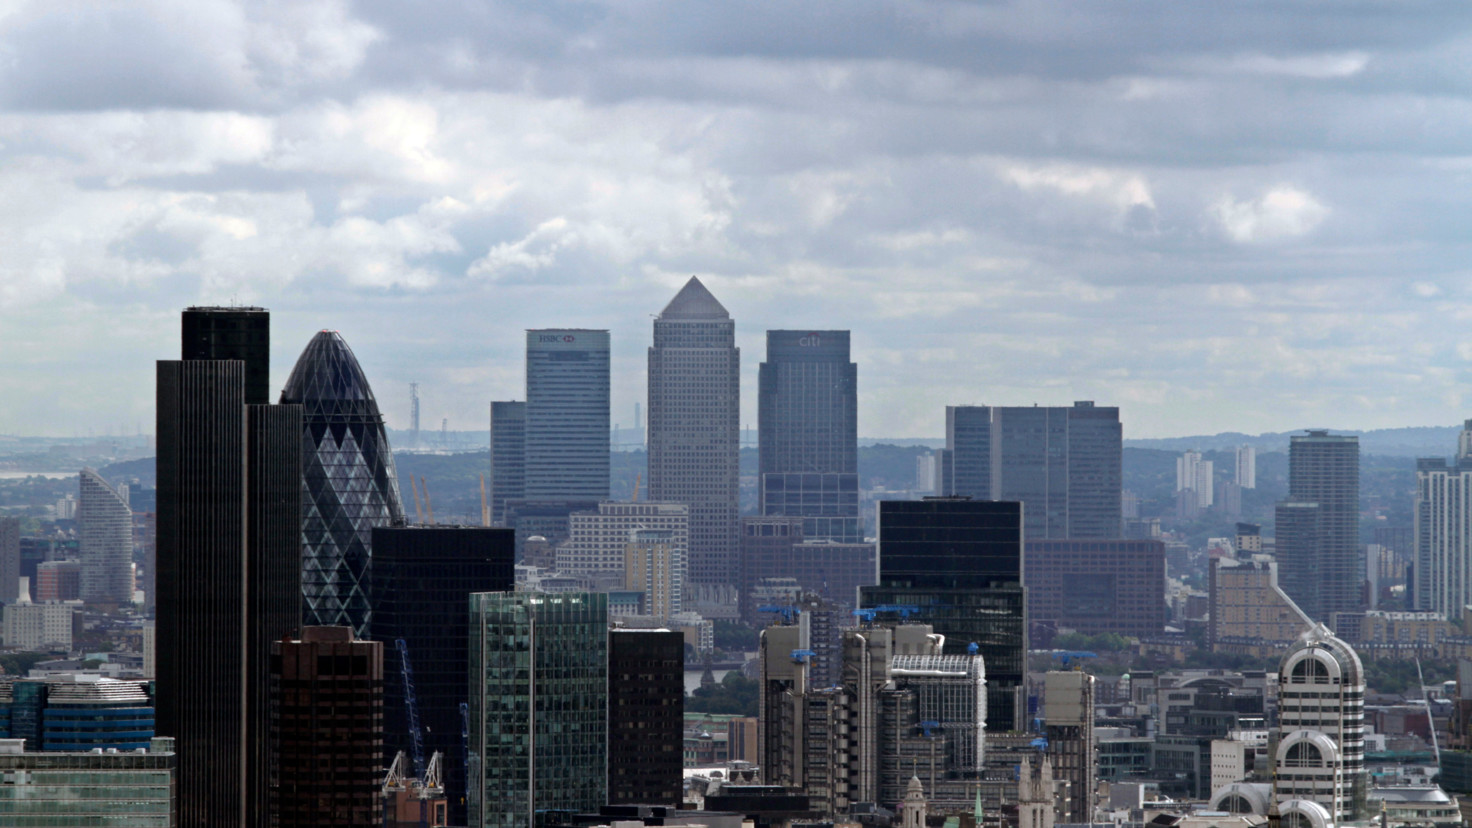 View of the City of London with Canary Wharf in the background